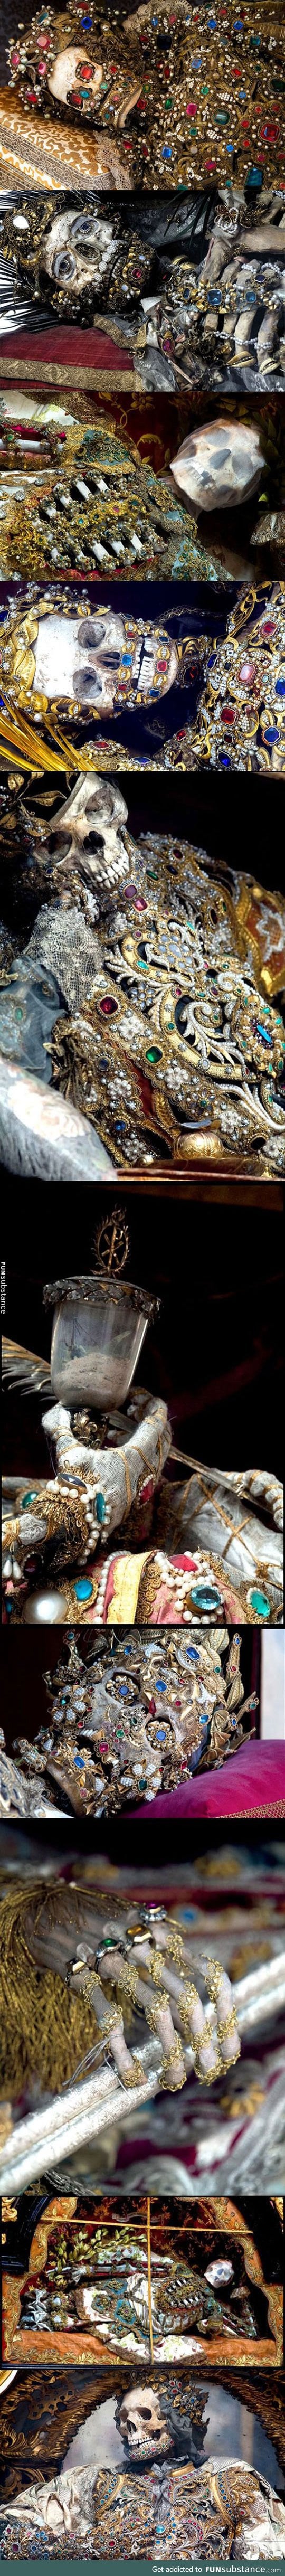 Skeletons unearthed from the catacombs of rome